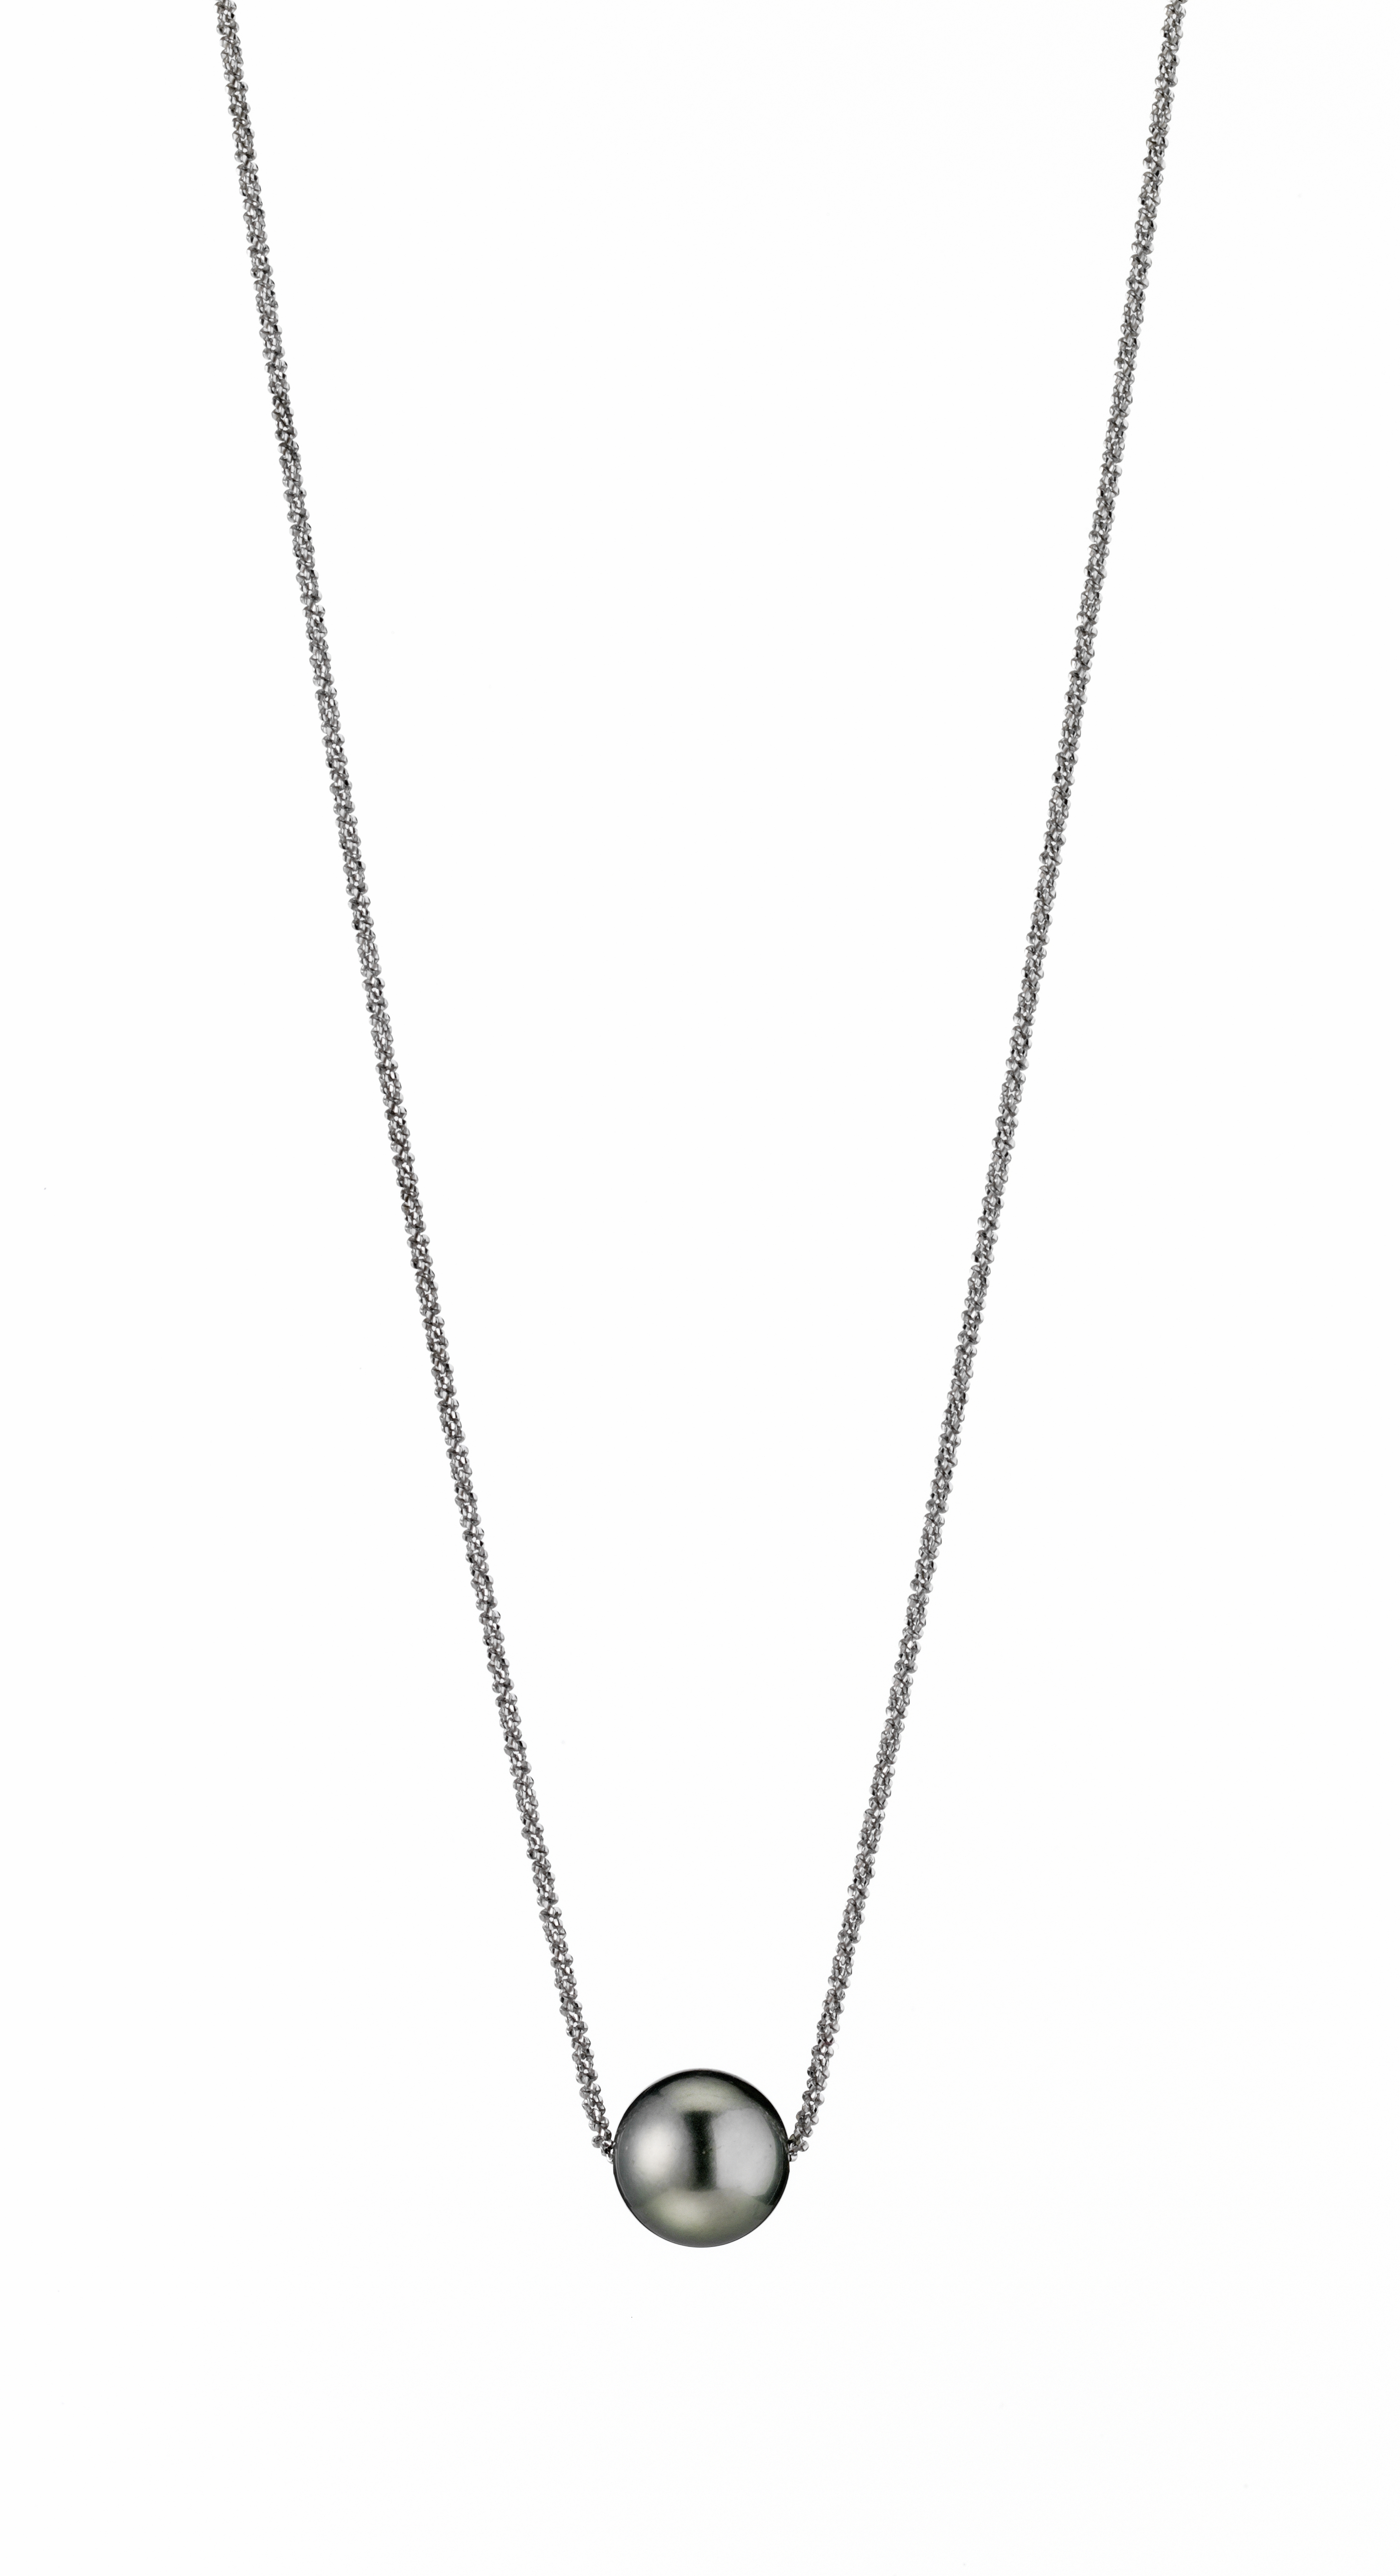 Collier mit Tahitiperle I Silber 925